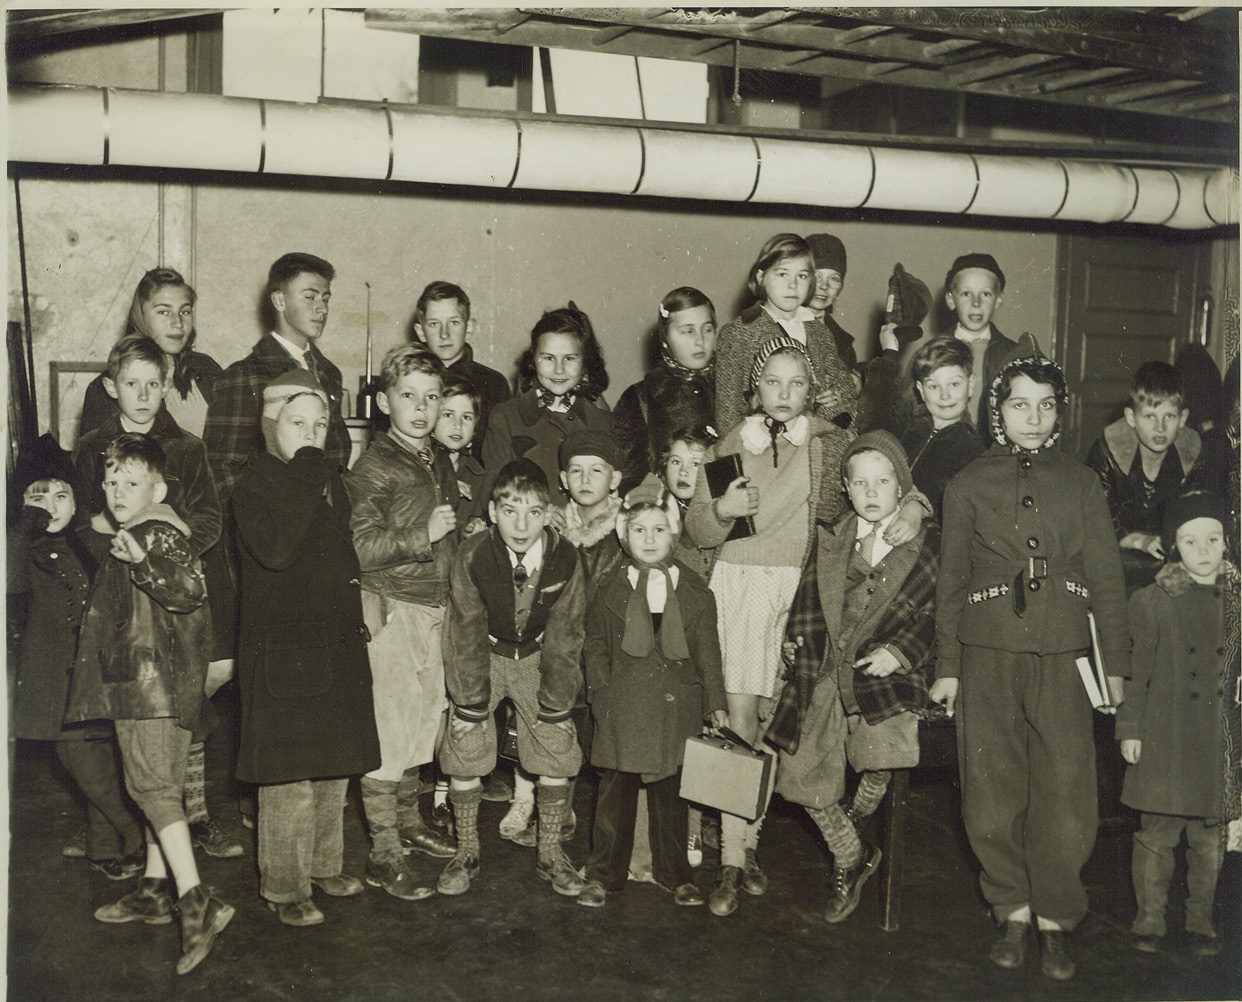 SCHOOL BASEMENT “SHELTER” FOR CHILDREN, 12/9/41  HEMPSTEAD, N.Y.: These youngsters, principally children of non-commissioned officers at Mitchell Field, were herded into the basement of the Washington School, Washington Street and Van Cott Avenue, when an air raid alarm was sounded, December 9. Women and children have been evacuated from Mitchell Field, which made it necessary to keep these youngsters in school while others were sent home in orderly manner. War Department officials later said the alarm resulted from a “phony” tip. Credit: OWI Radiophoto from ACME;